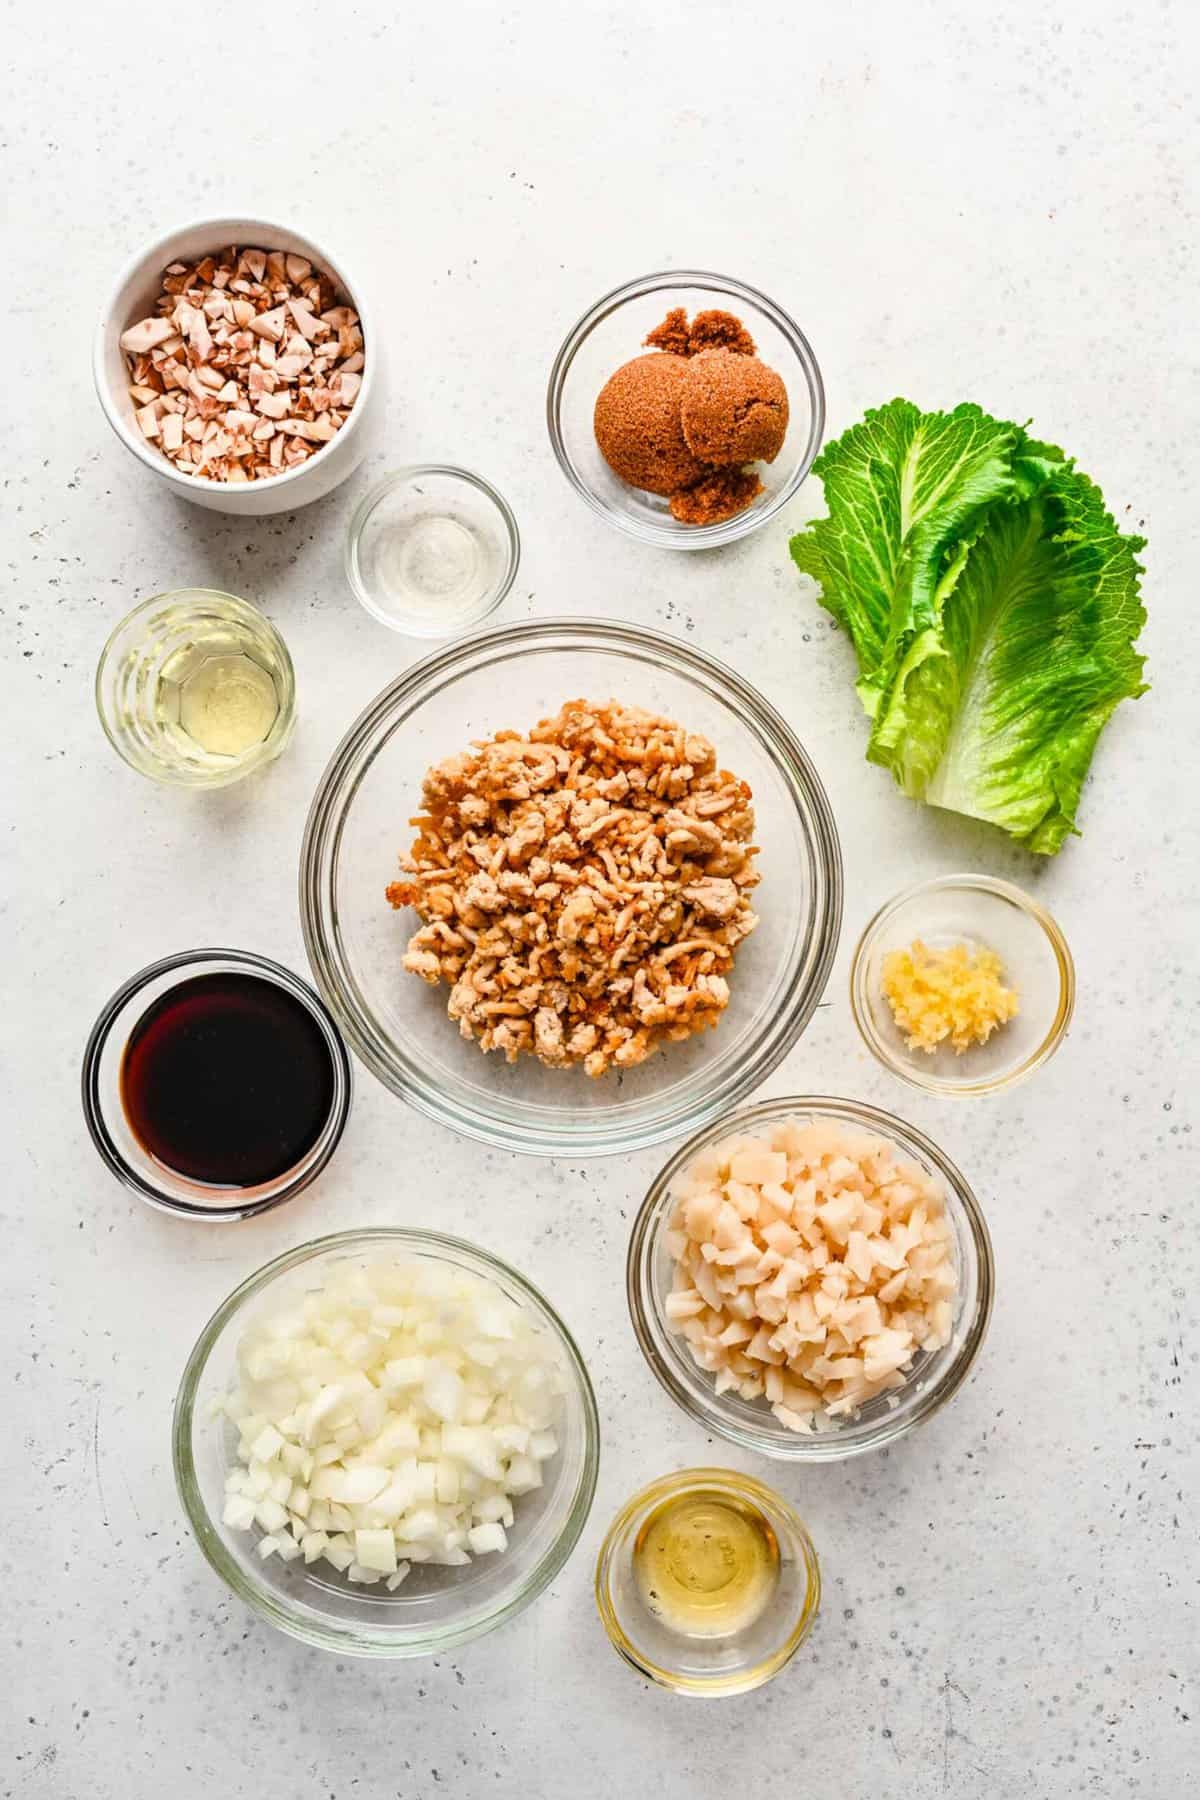 Ingredients for chicken lettuce wraps.